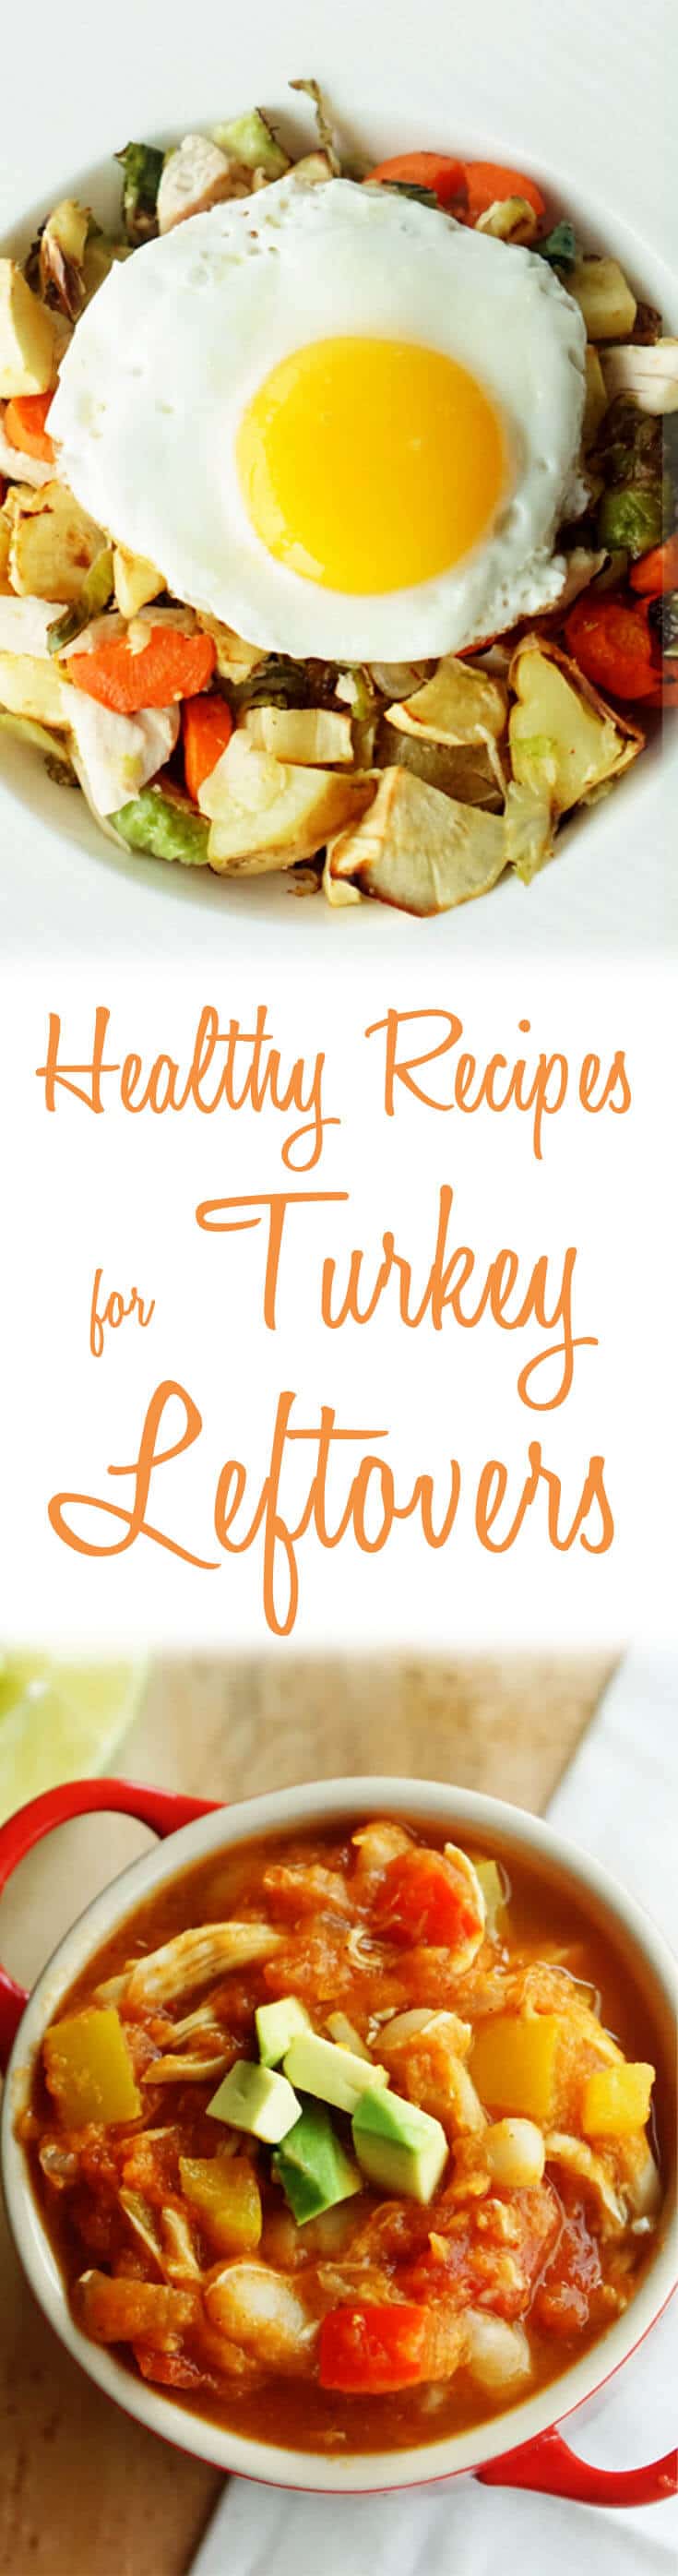 Check out these 3 healthy & delicious recipes that will take your turkey leftovers, and turn them into something exciting!